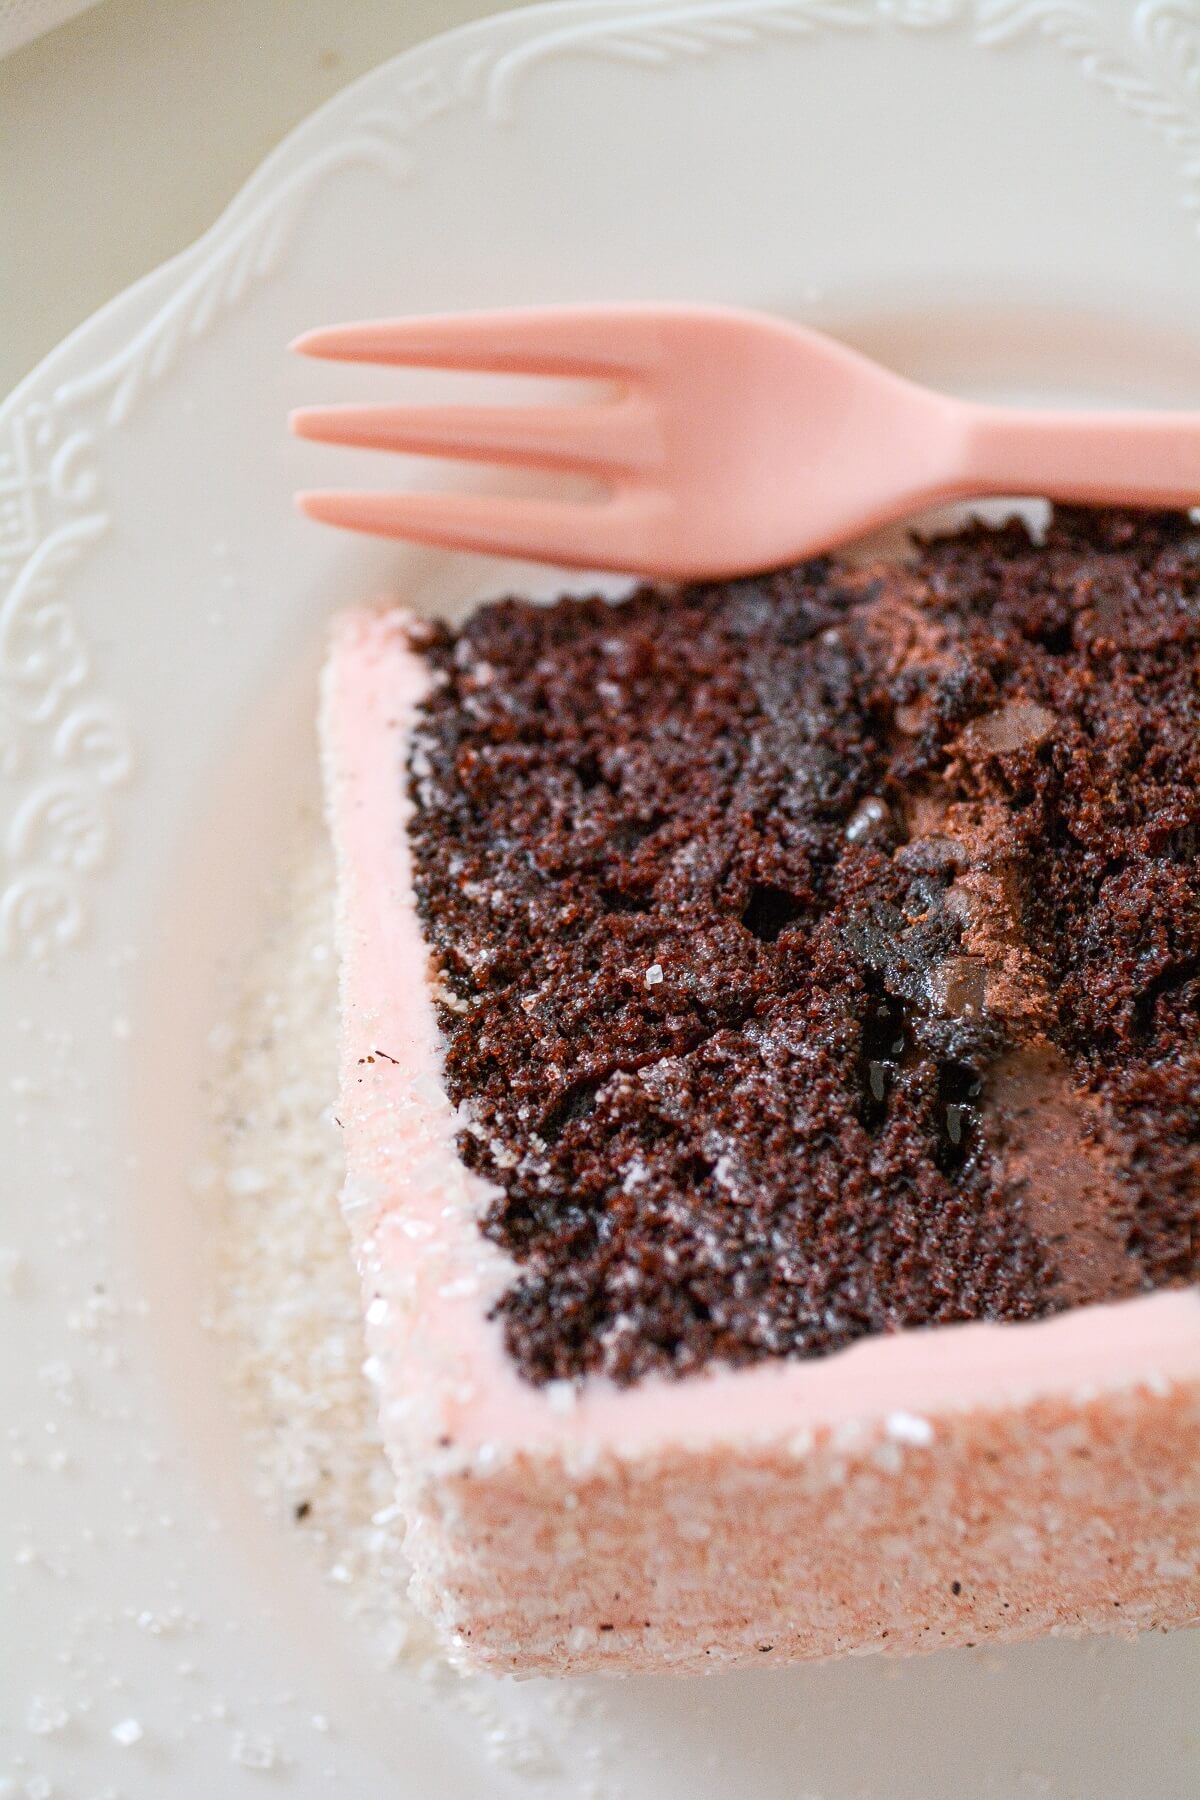 A slice of chocolate cake with chocolate filling and pink peppermint buttercream.